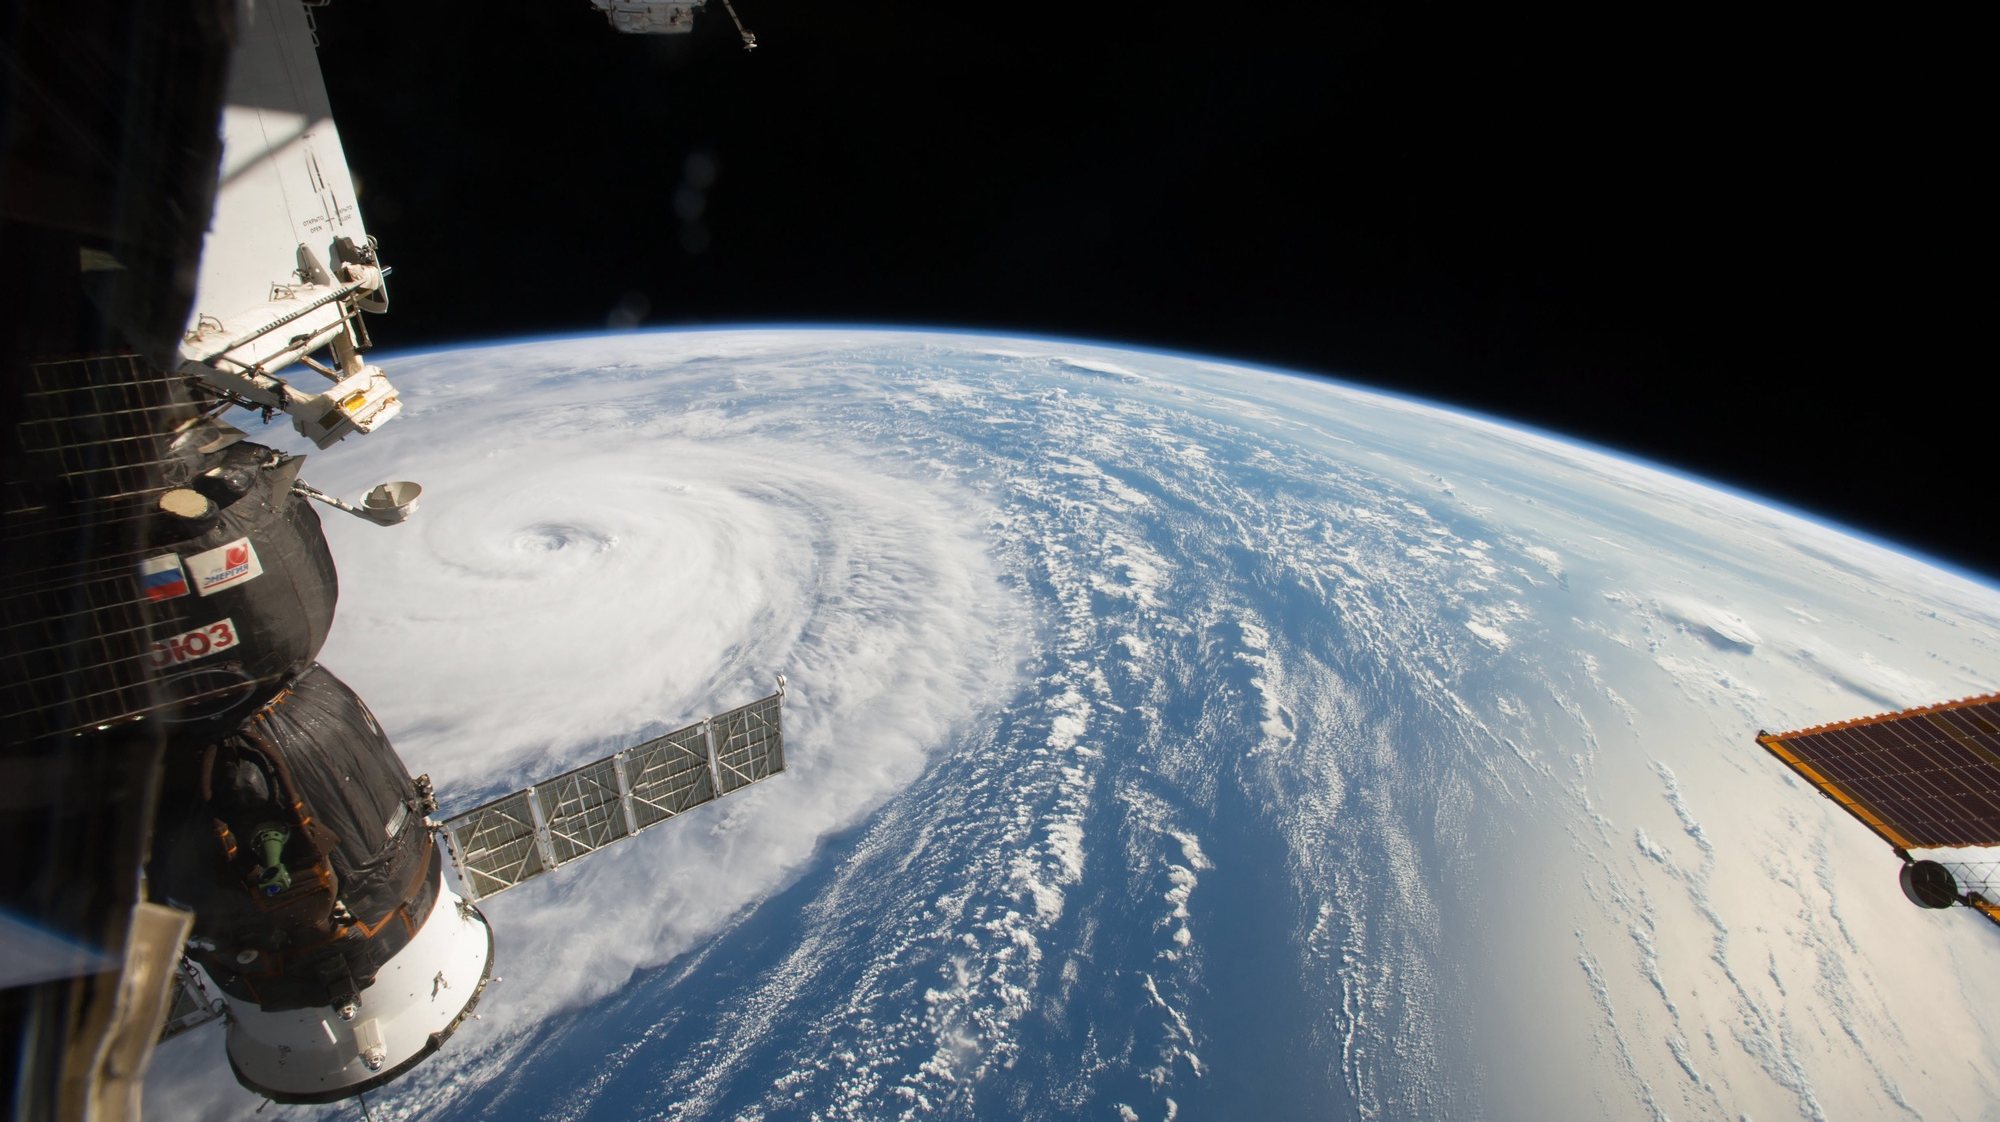 epa06122337 A handout photo made available by the National Aeronautics and Space Administration (NASA) on 03 August 2017 shows Typhoon Noru in the northern Pacific Ocean taken from the International Space Station (ISS) on 01 August 2017. According to media reports, the typhoon has maximum winds of up to 170 km/h and is listed as a category two hurricane. The storm is expected to reach southern Japan by 05 August after passing through a low wind shear, high water temperature area - possibly gathering strength along the way.  EPA/NASA/RANDY BRESNIK HANDOUT  HANDOUT EDITORIAL USE ONLY/NO SALES